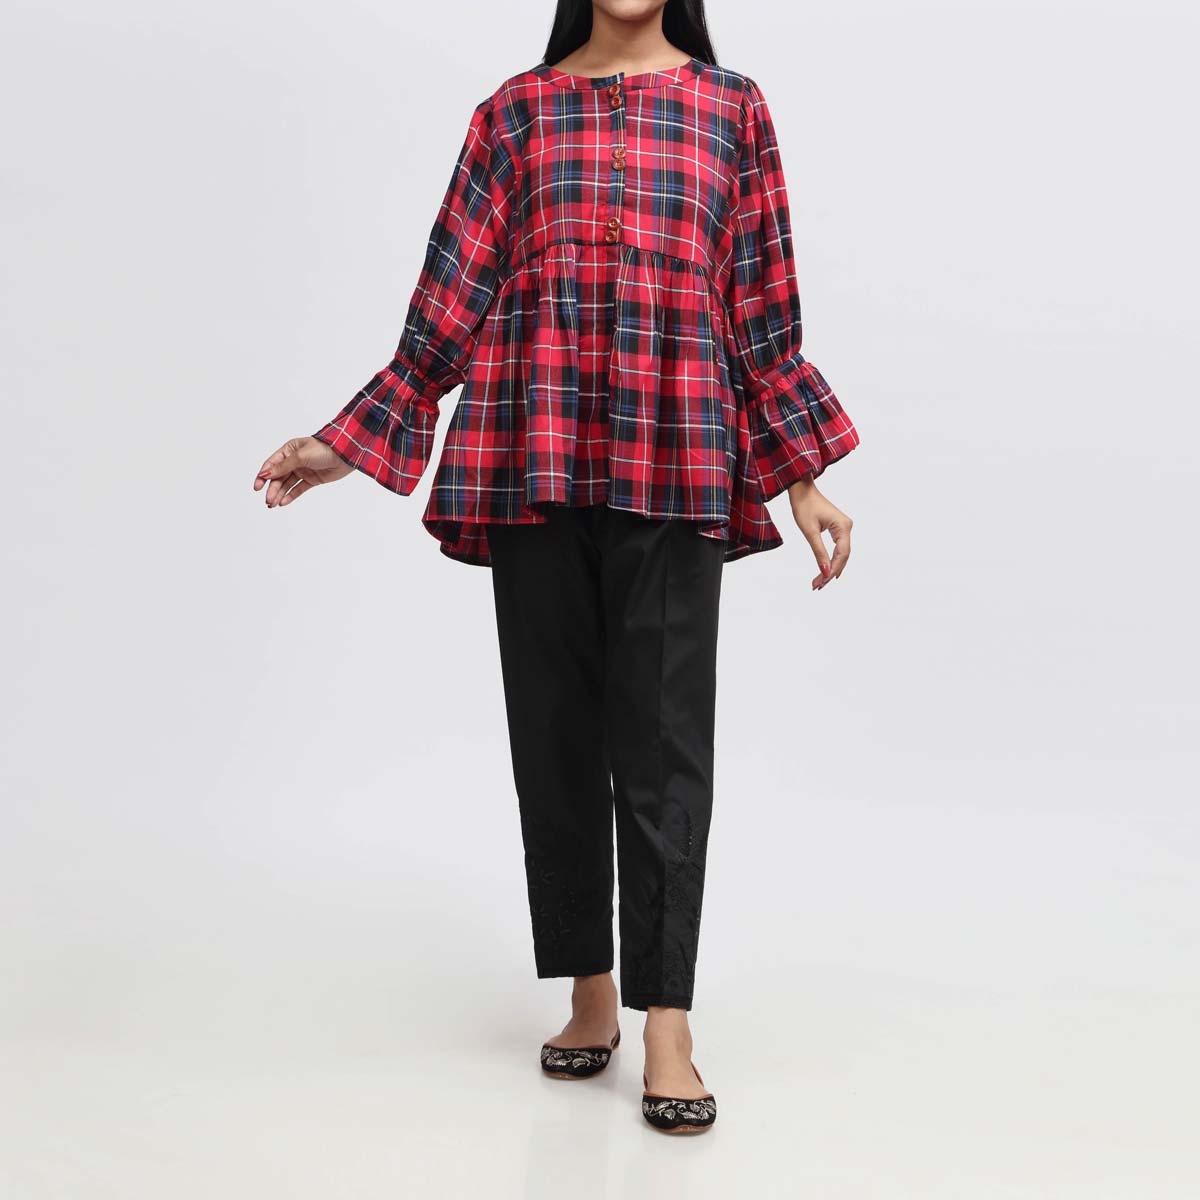 1PC- Flannel Checkered Top PW3216